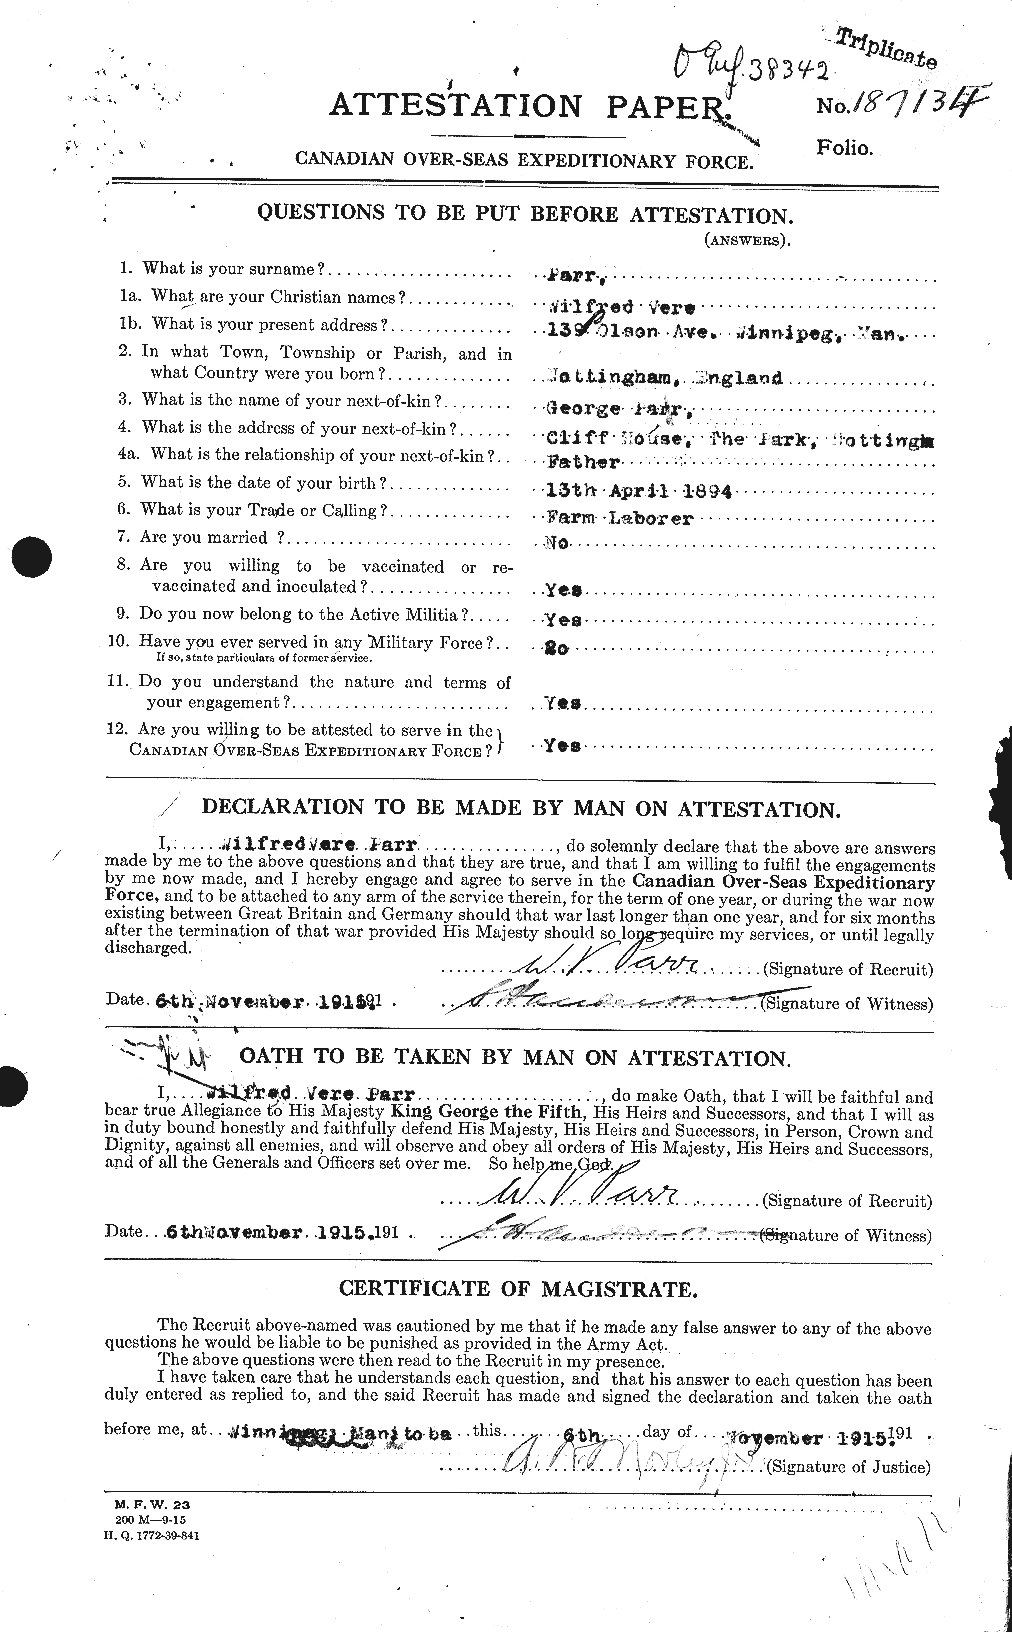 Personnel Records of the First World War - CEF 566455a